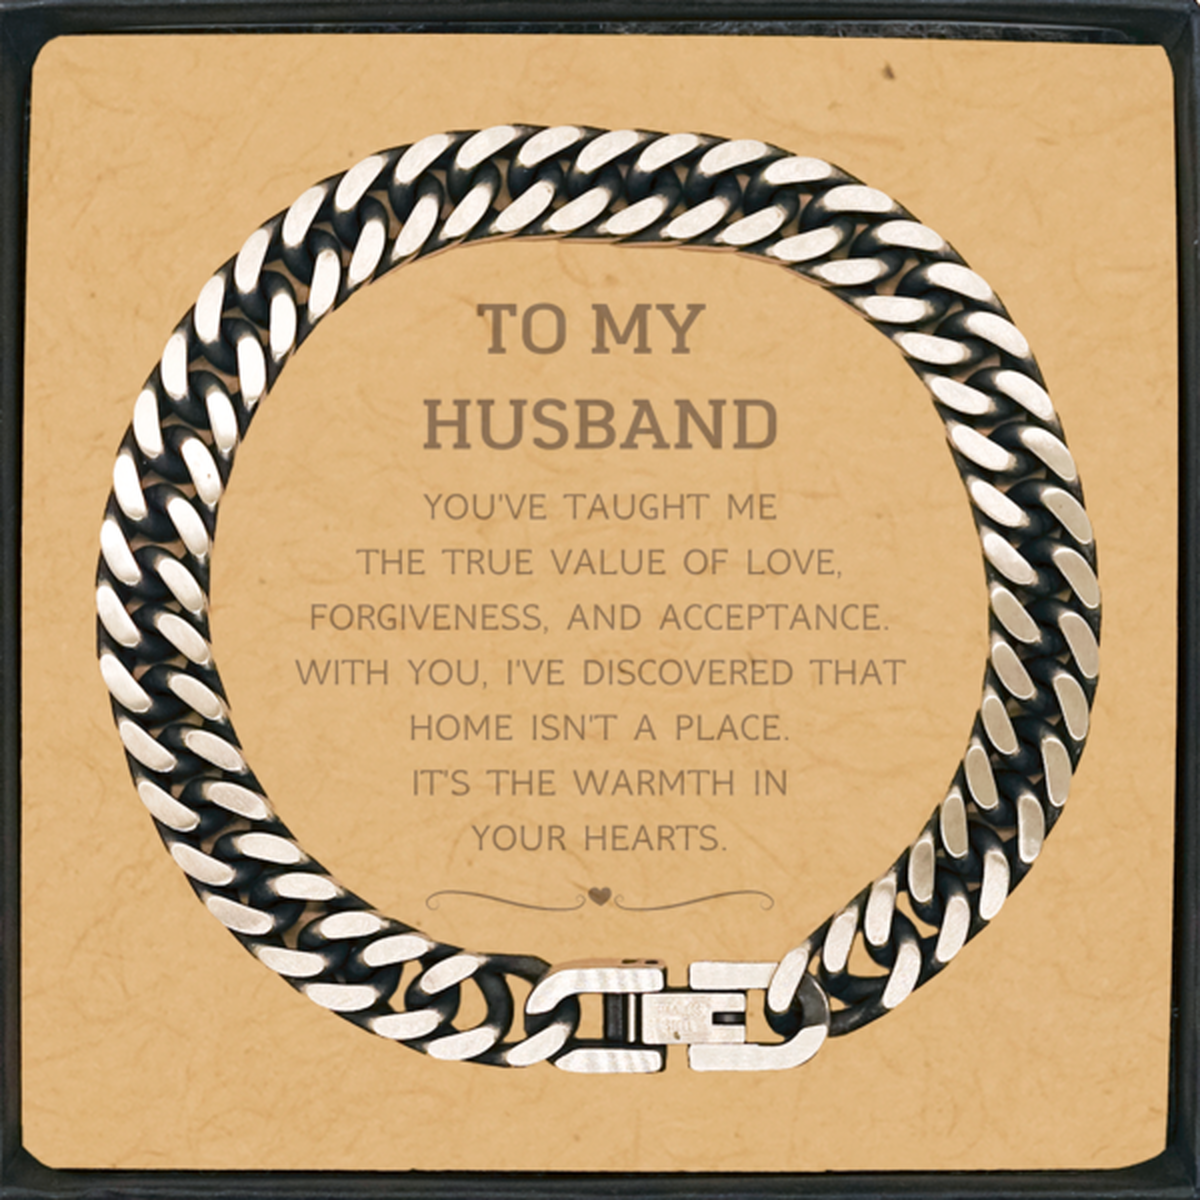 To My Husband Gifts, You've taught me the true value of love, Thank You Gifts For Husband, Birthday Cuban Link Chain Bracelet For Husband